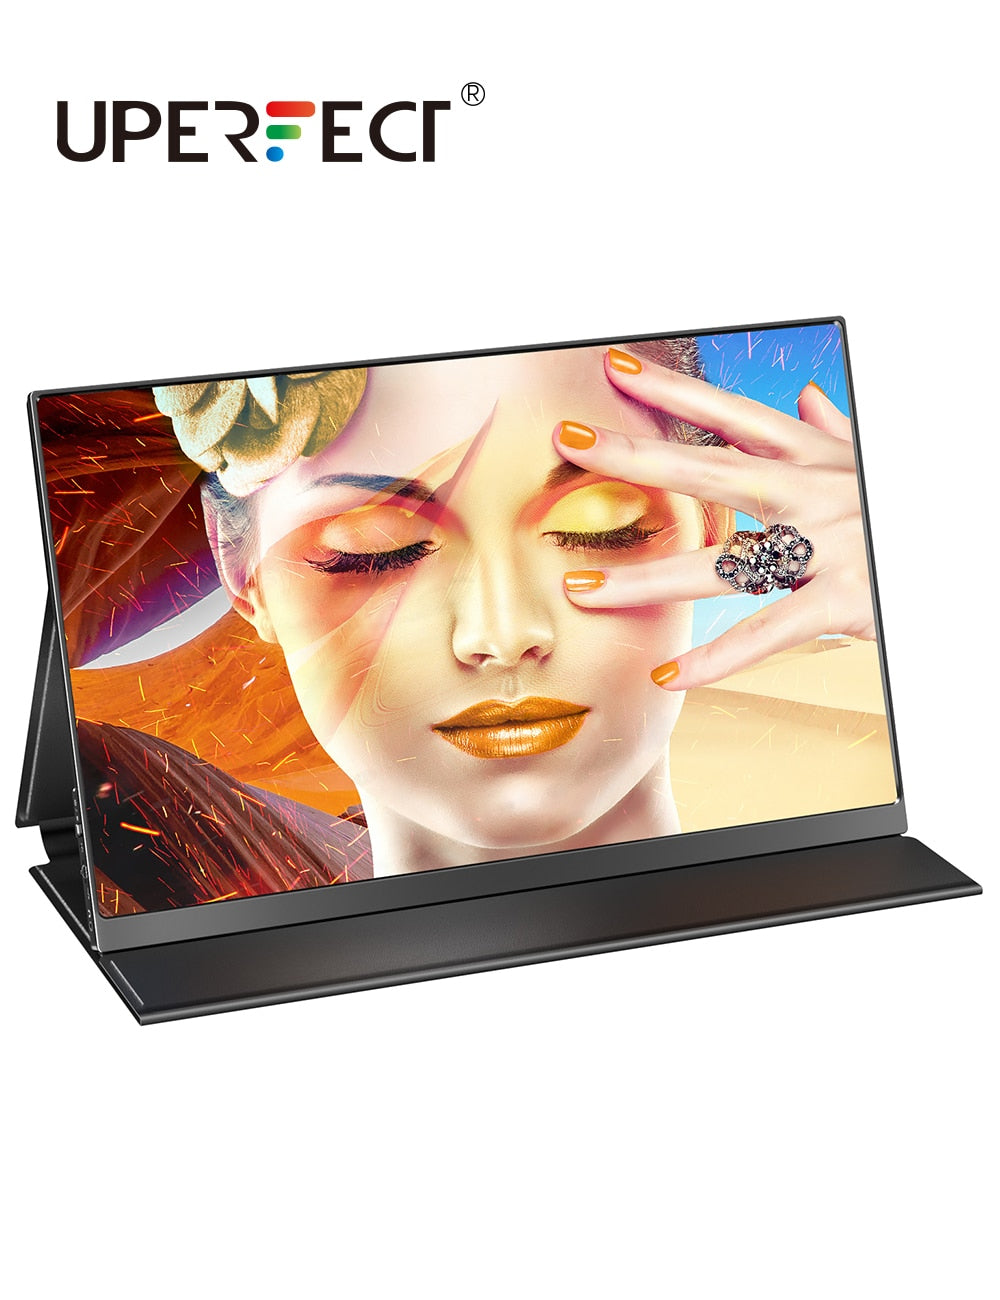 UPERFECT 15.6&quot; Portable Monitor 100% DCI-P3 99% sRGB, 500 Nits Brightness FHD IPS ScreenHDR Gaming Computer Display with USB C